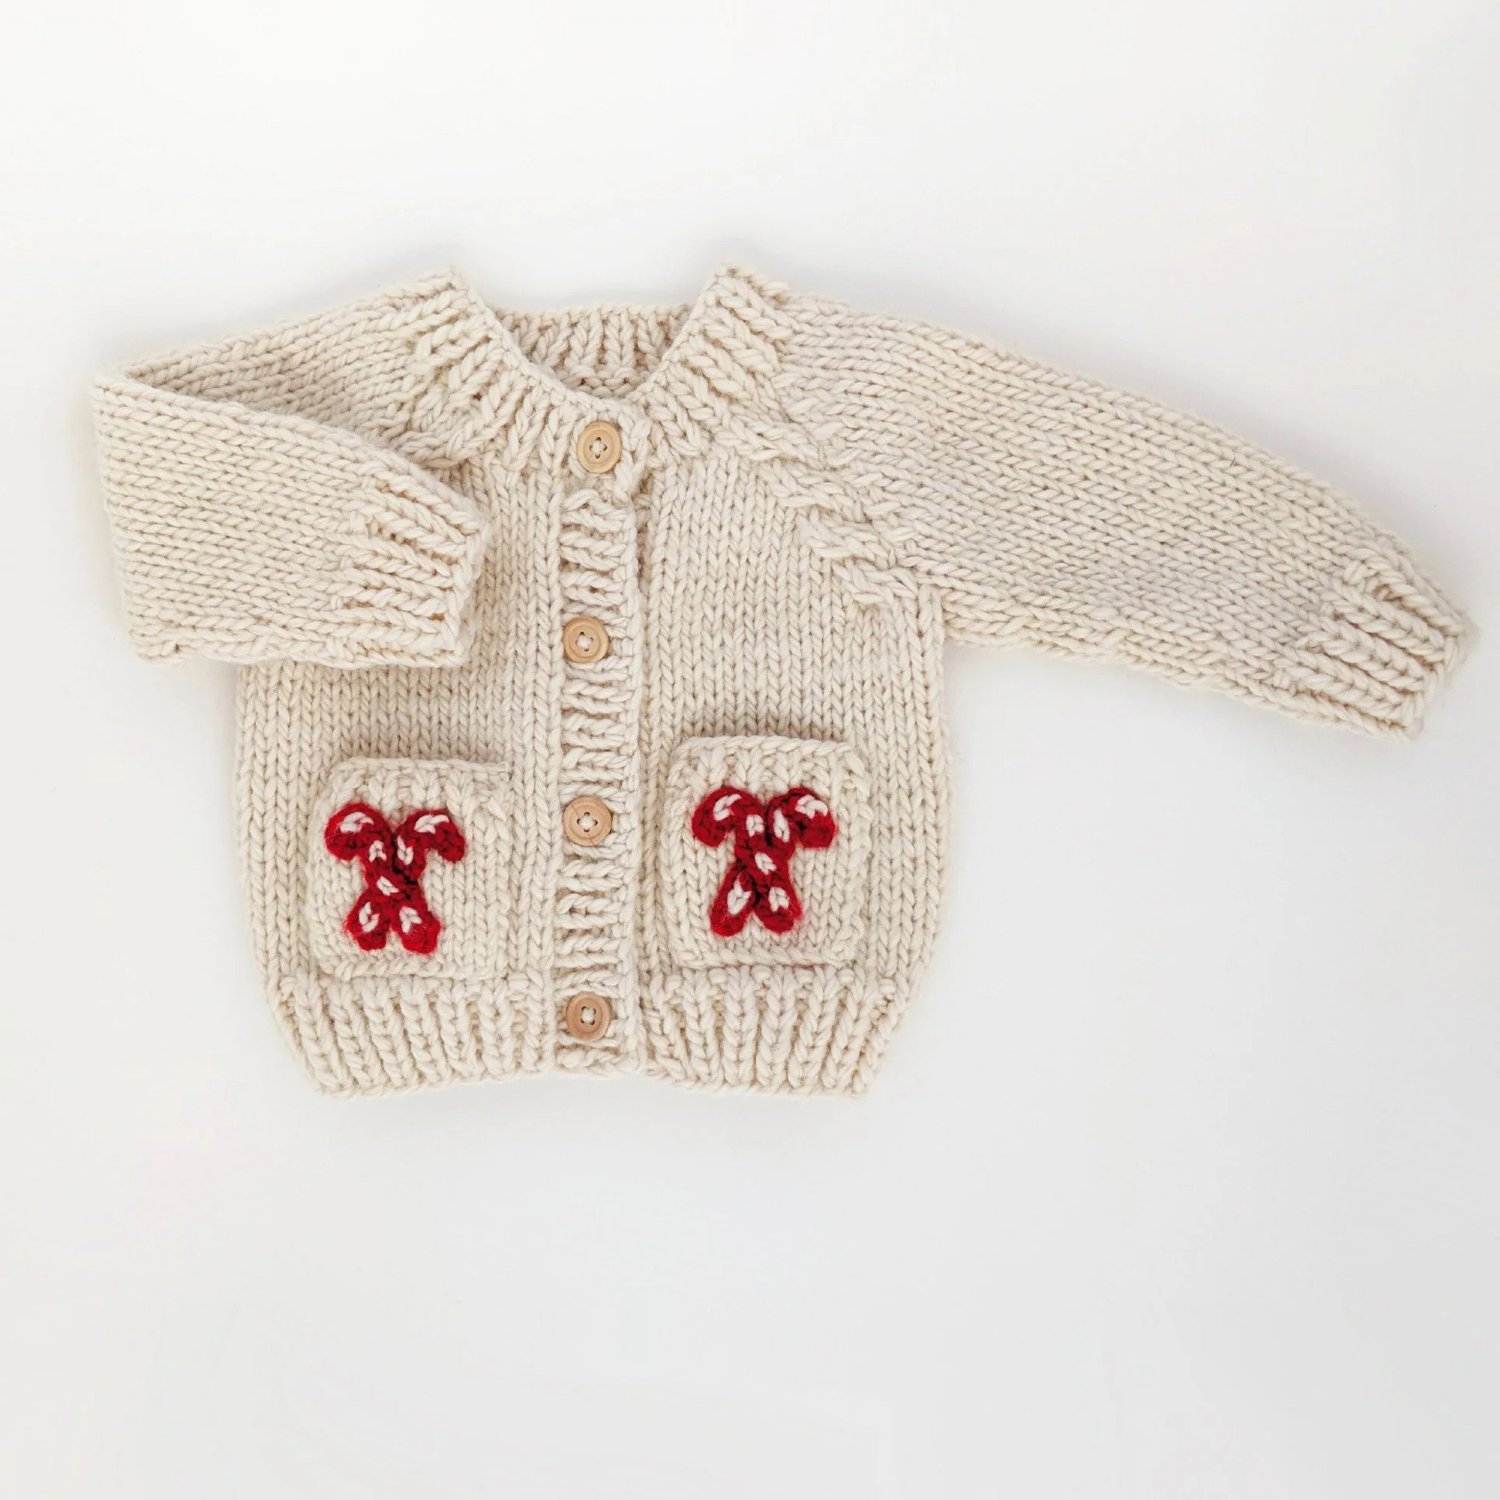 Buy Handmade Entirely Knitted Beautiful Baby Boy